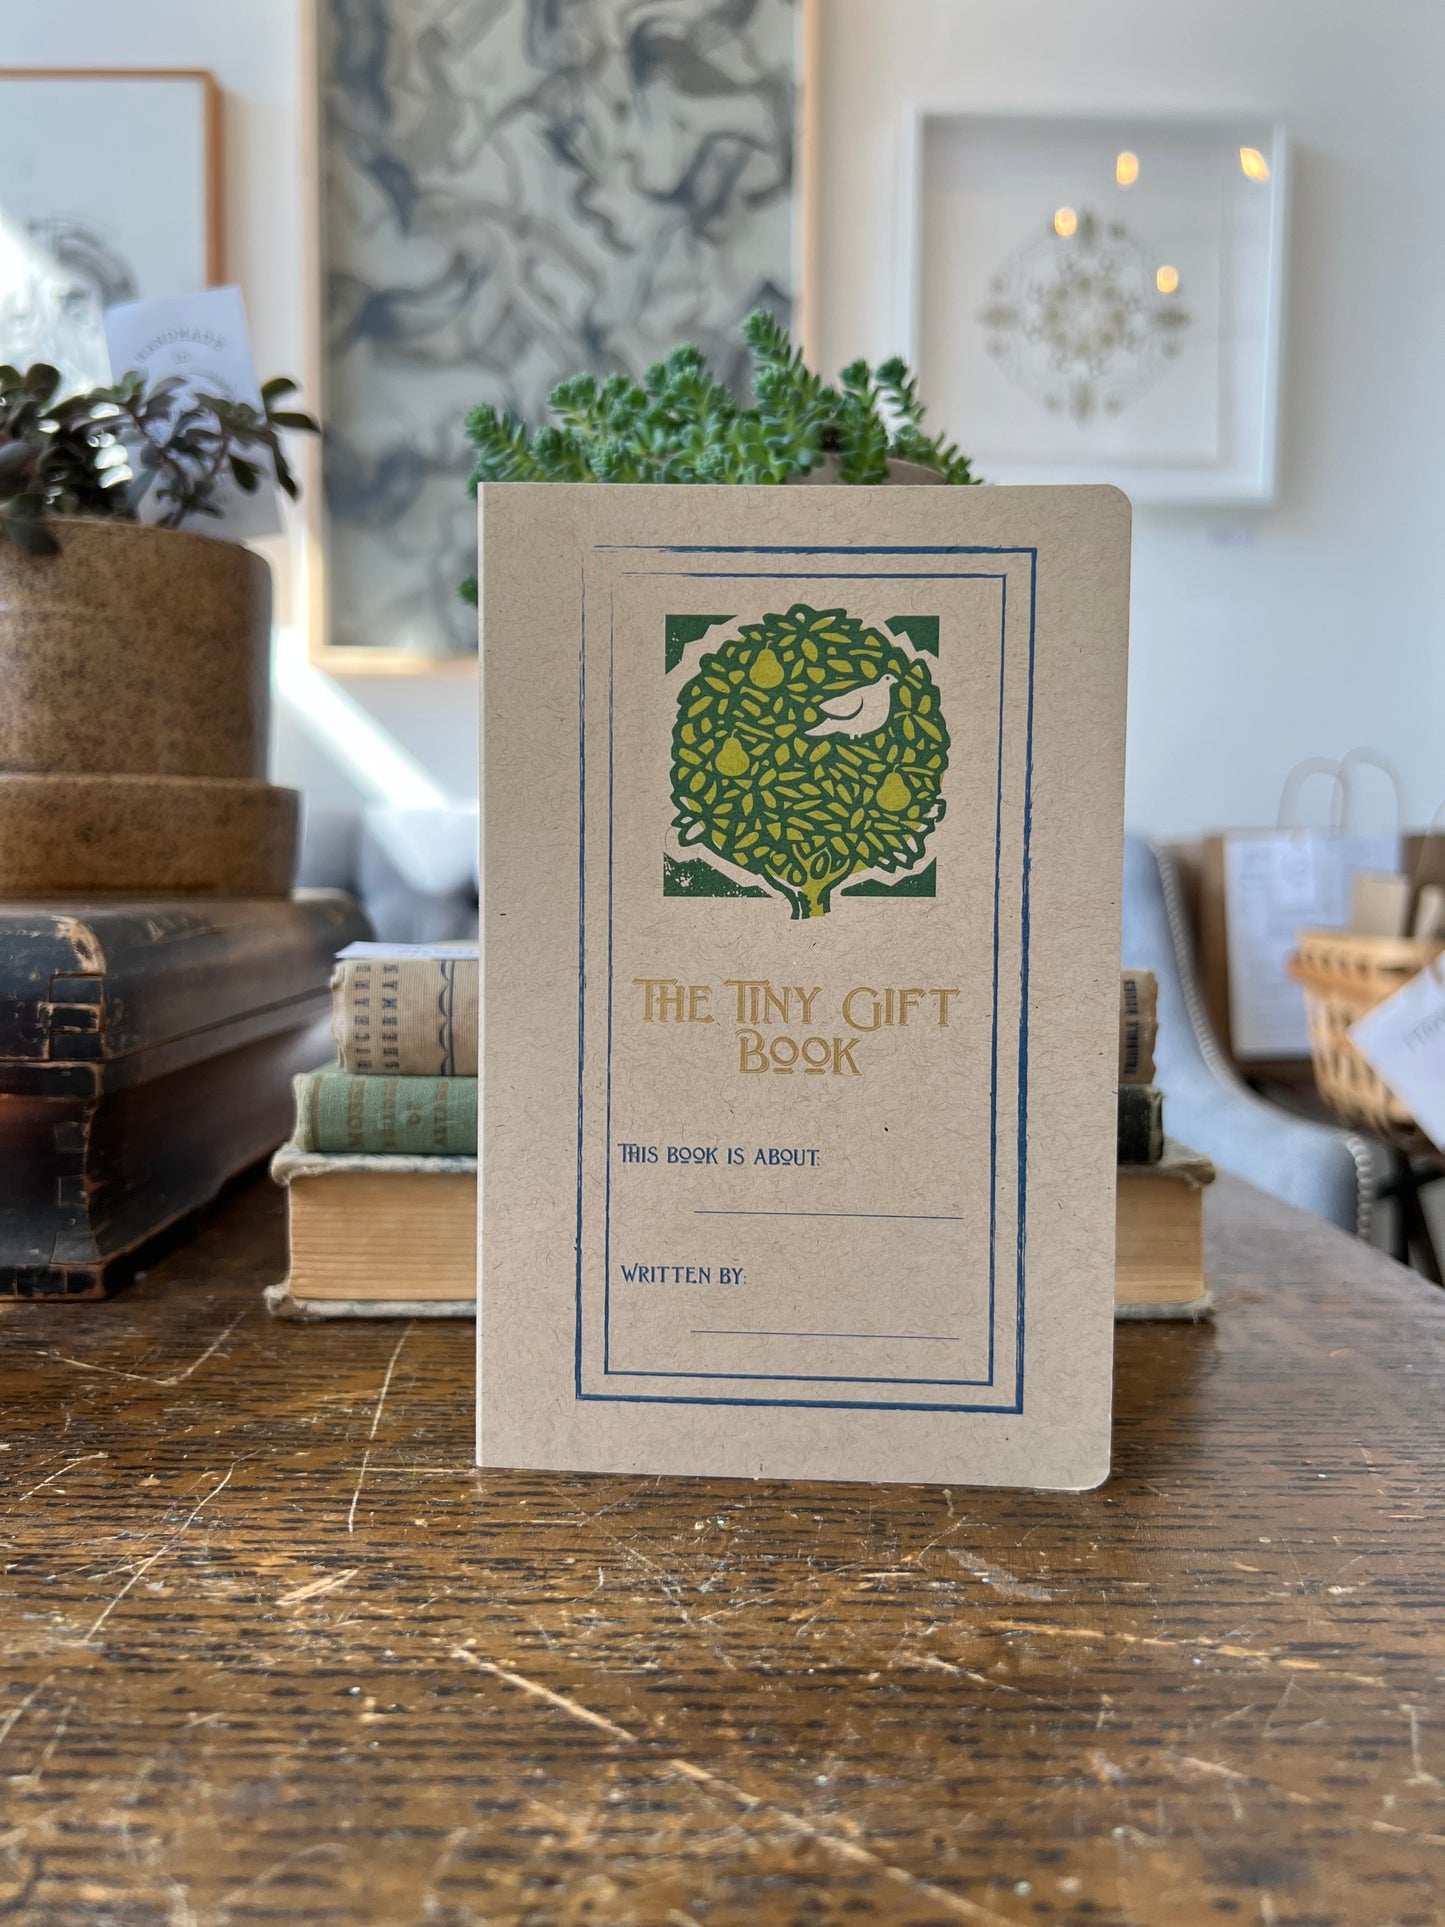 The Tiny Gift Book